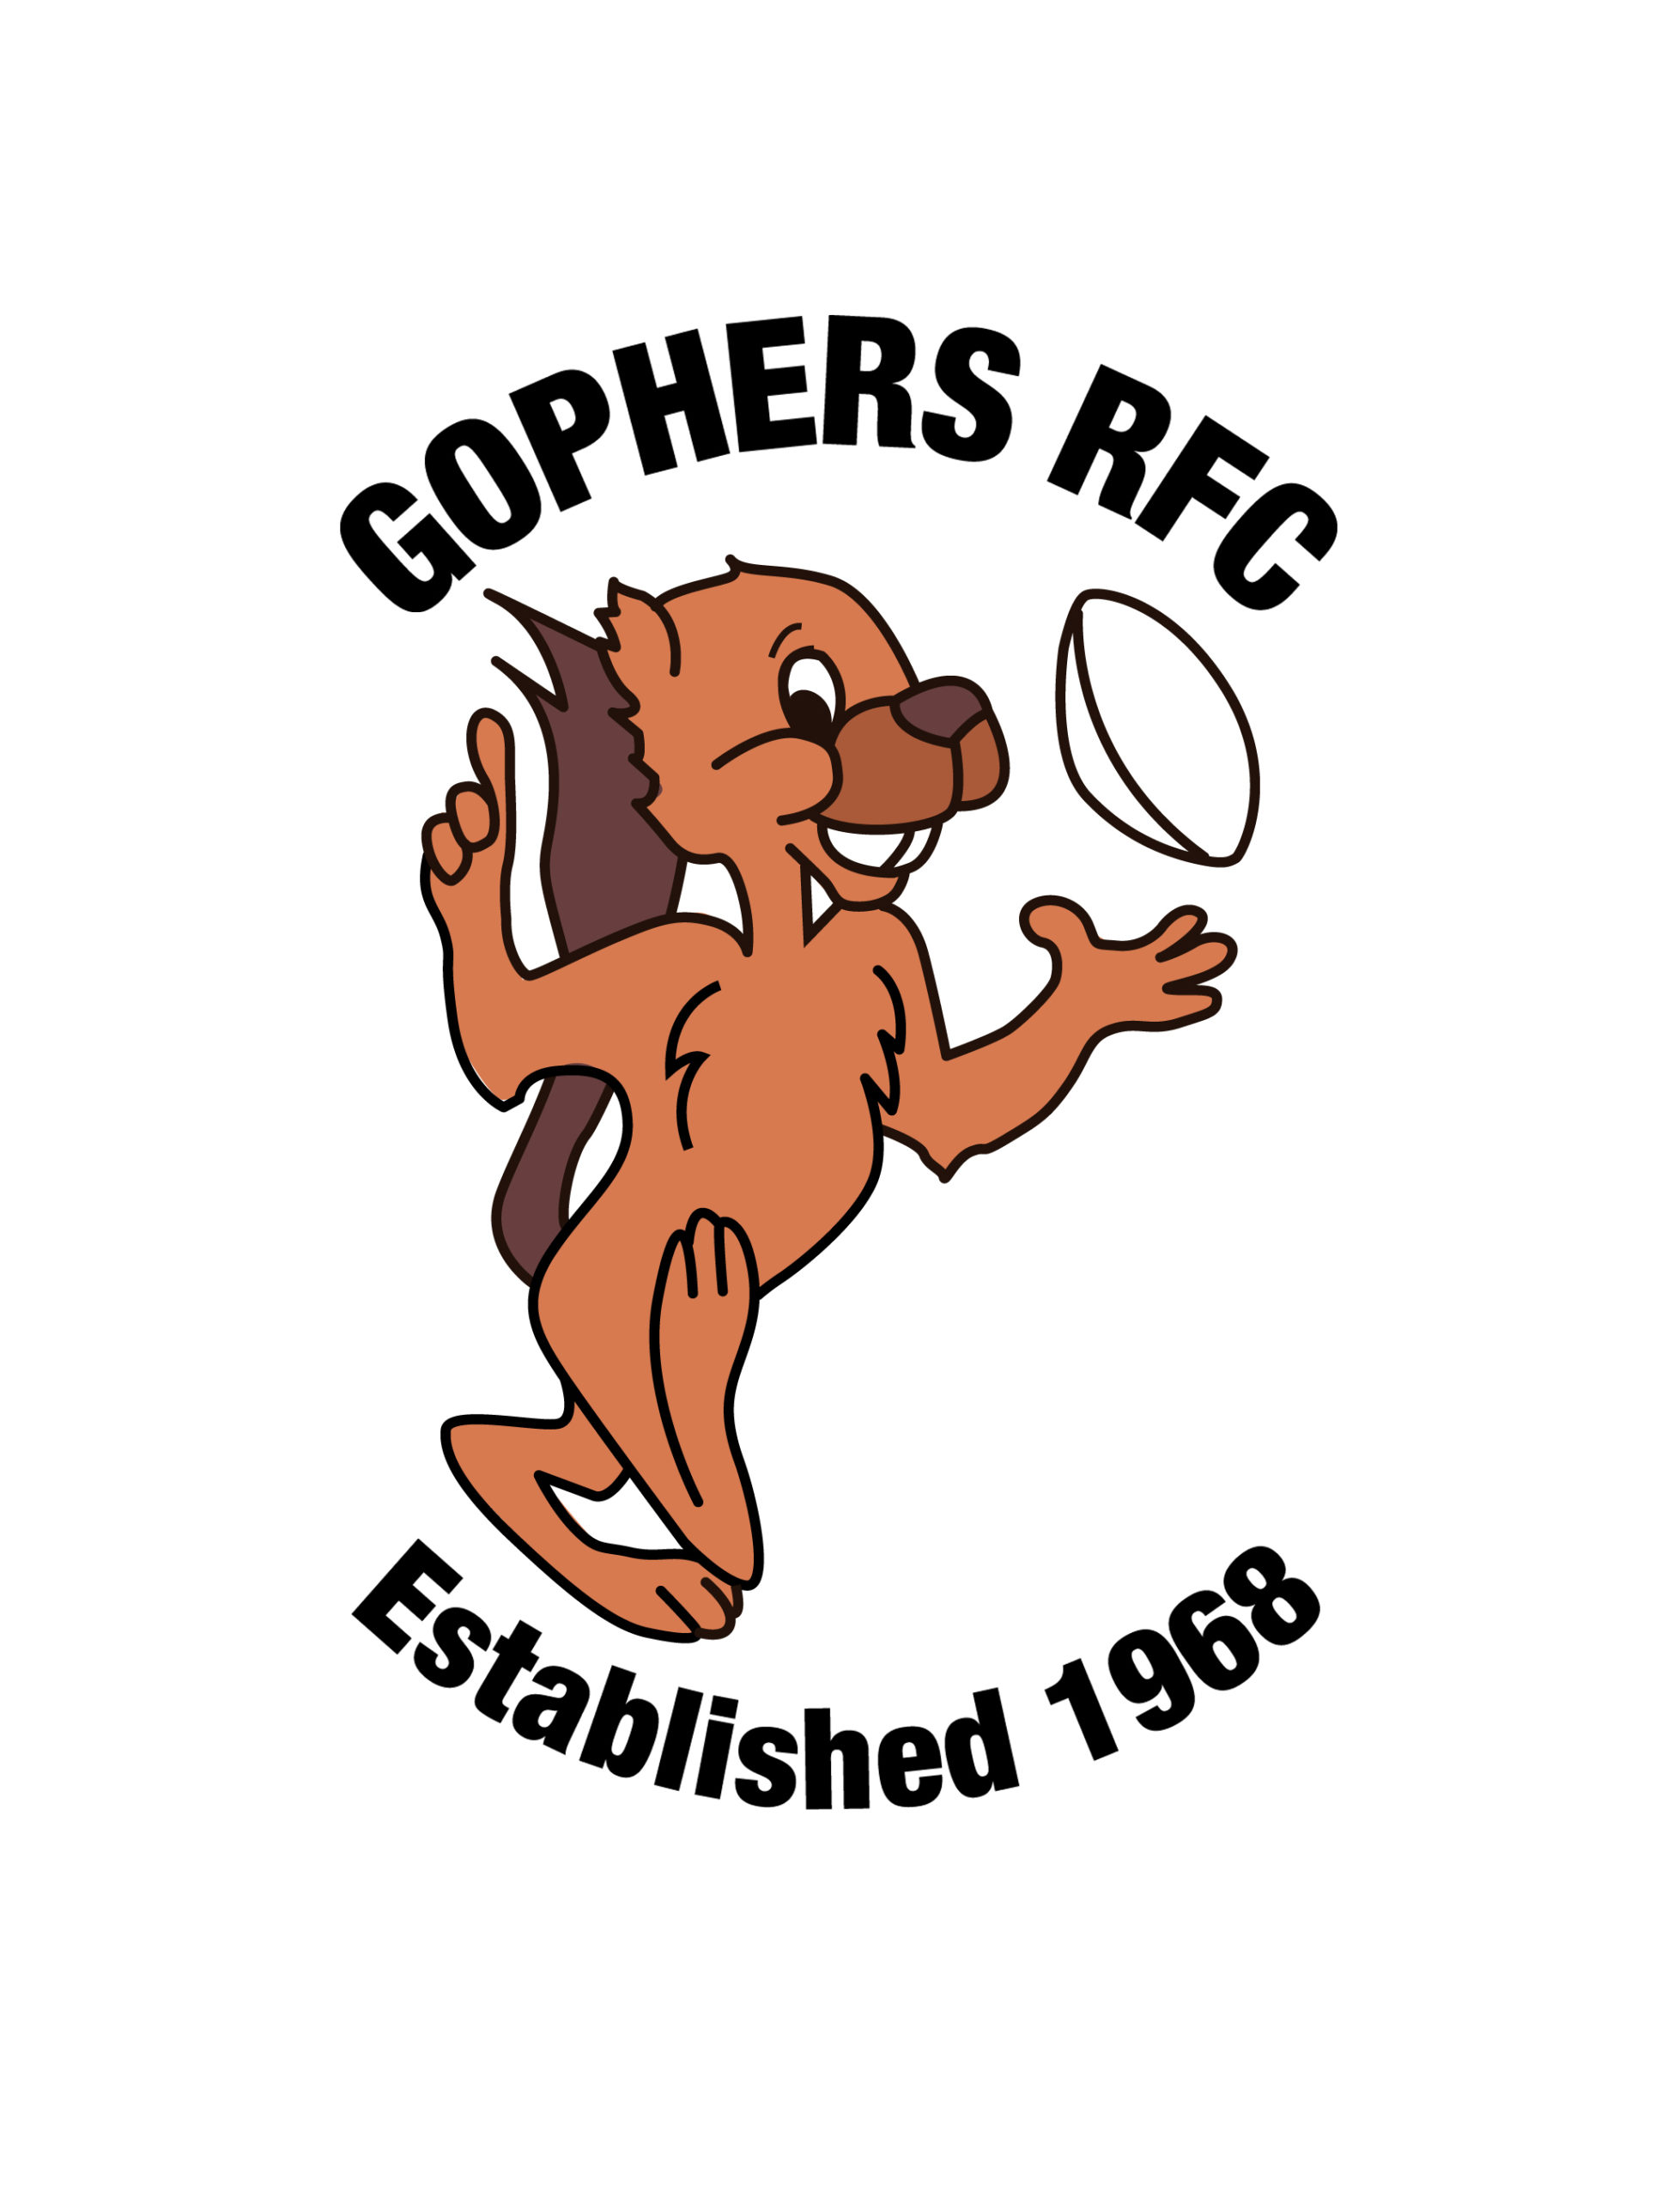 New Gopher